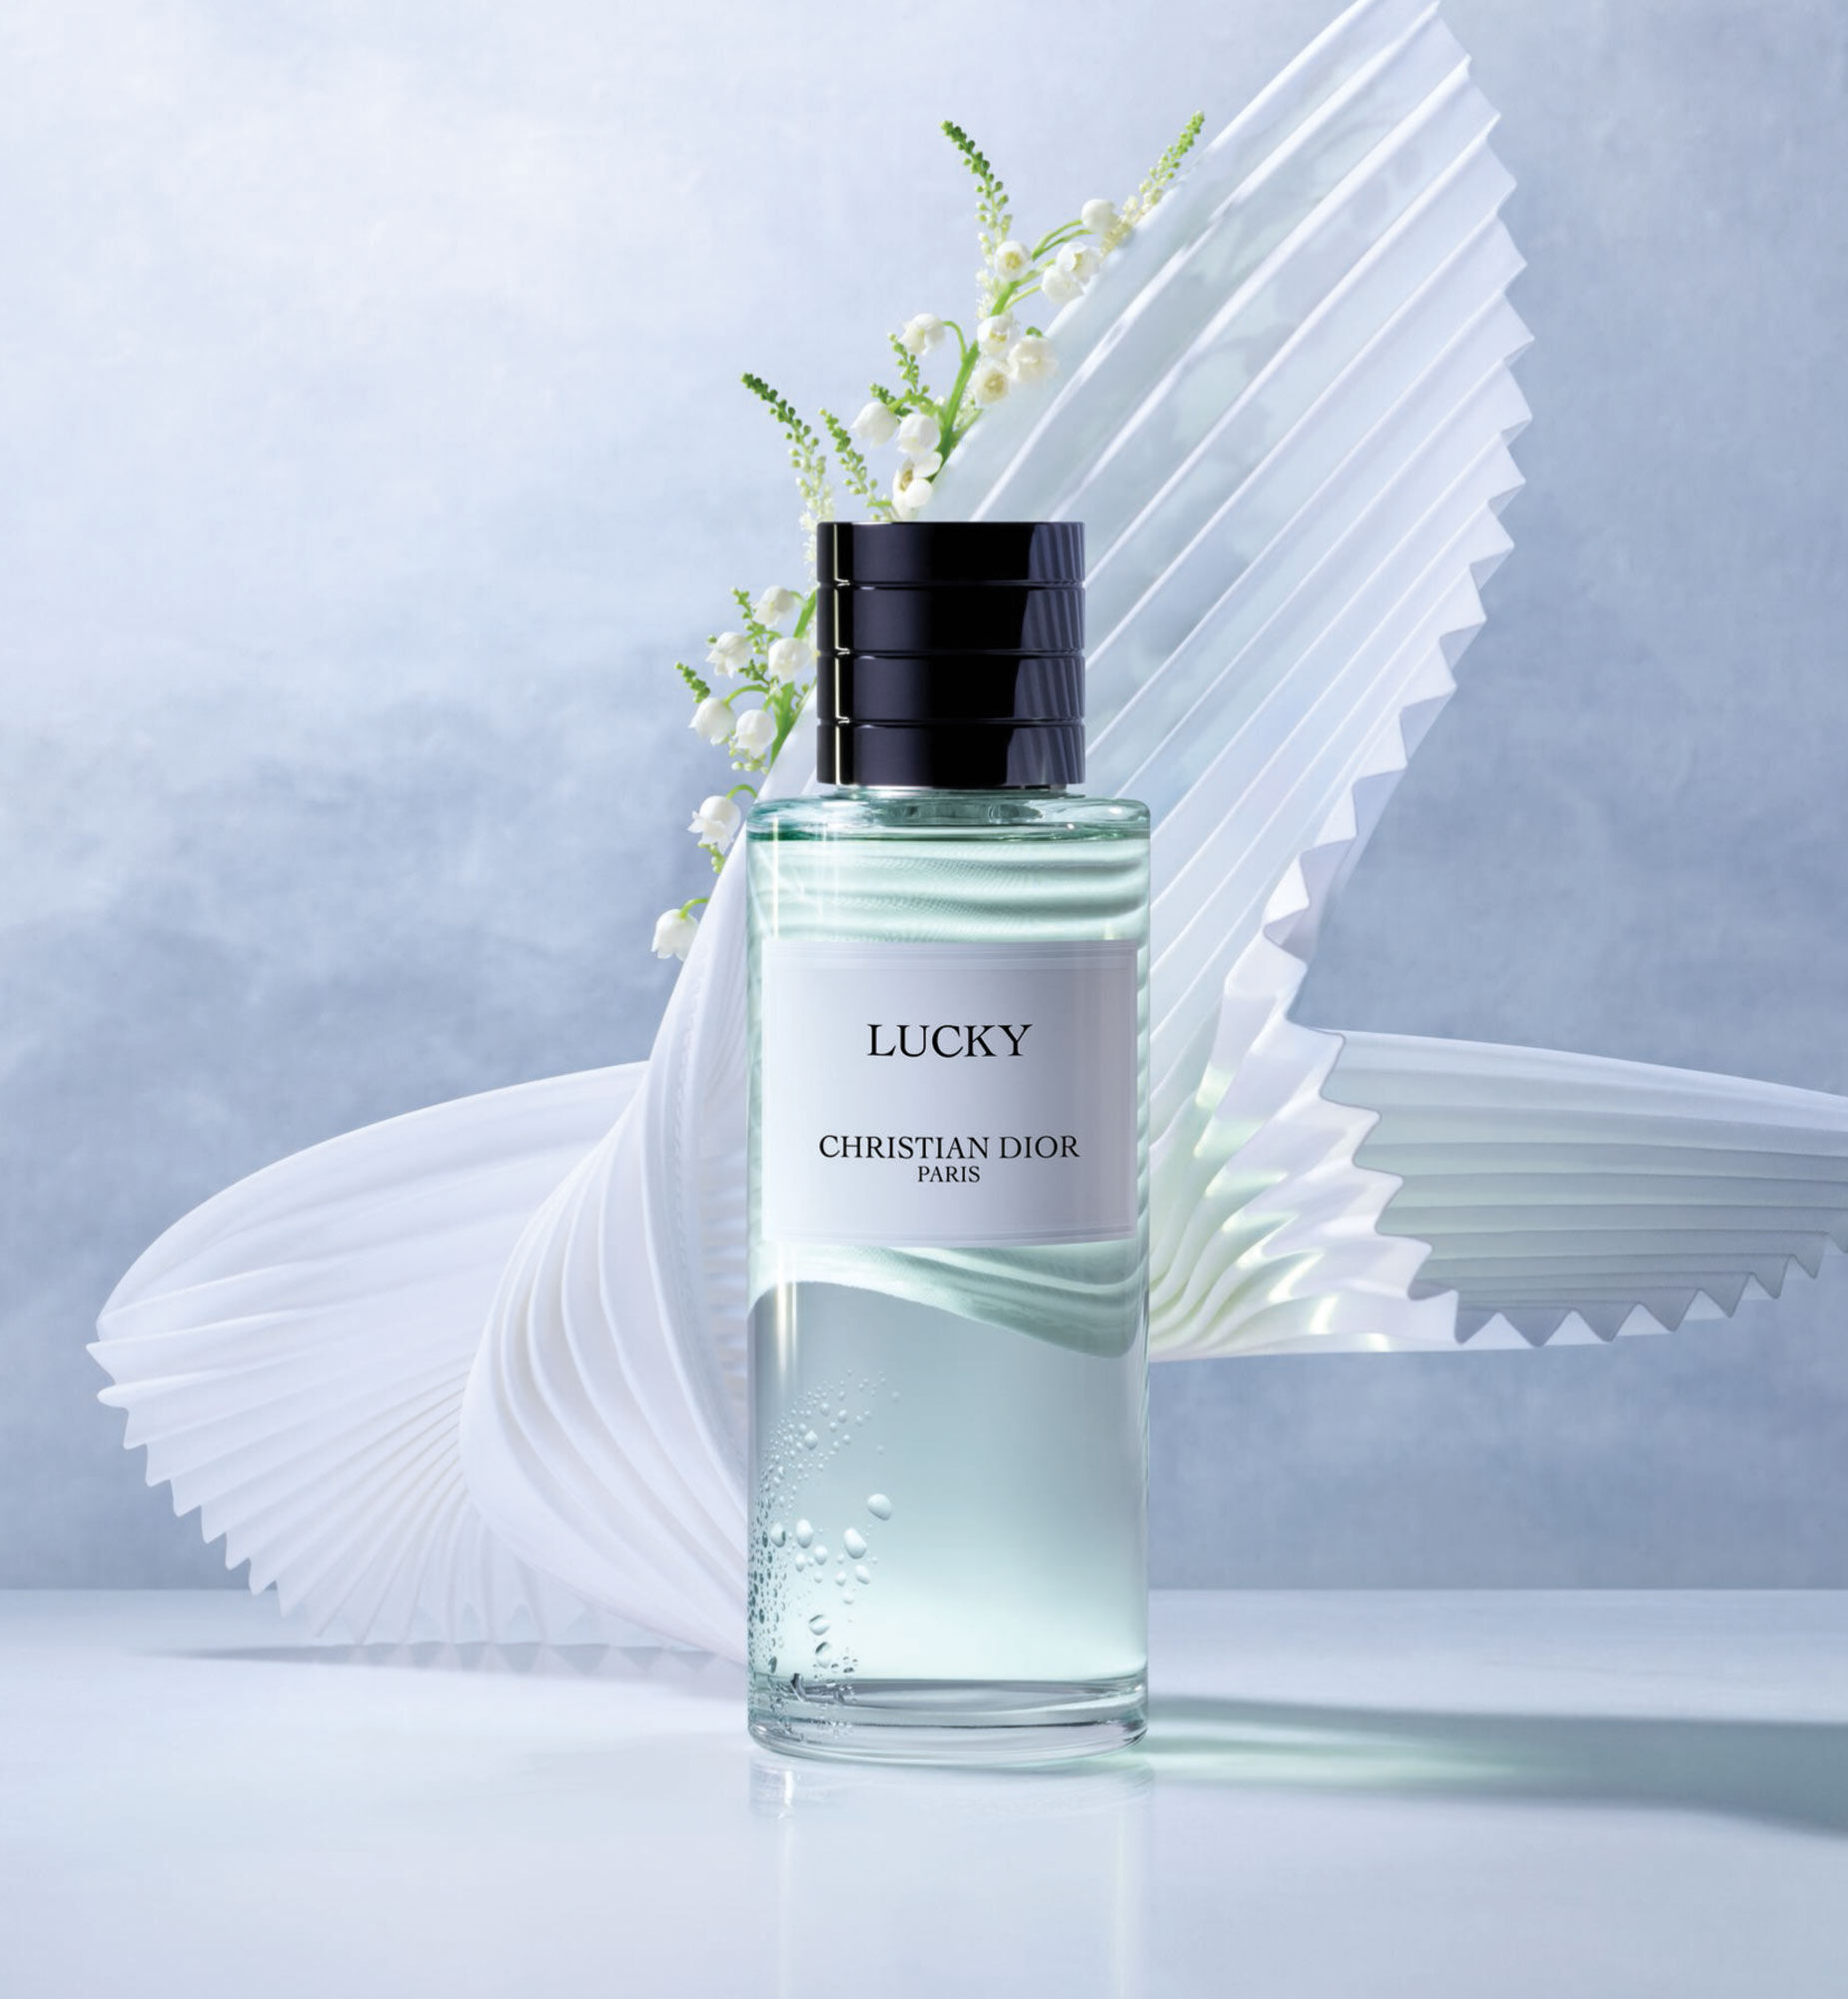 Lucky fragrance: the good luck charm fragrance with Lily-of-the